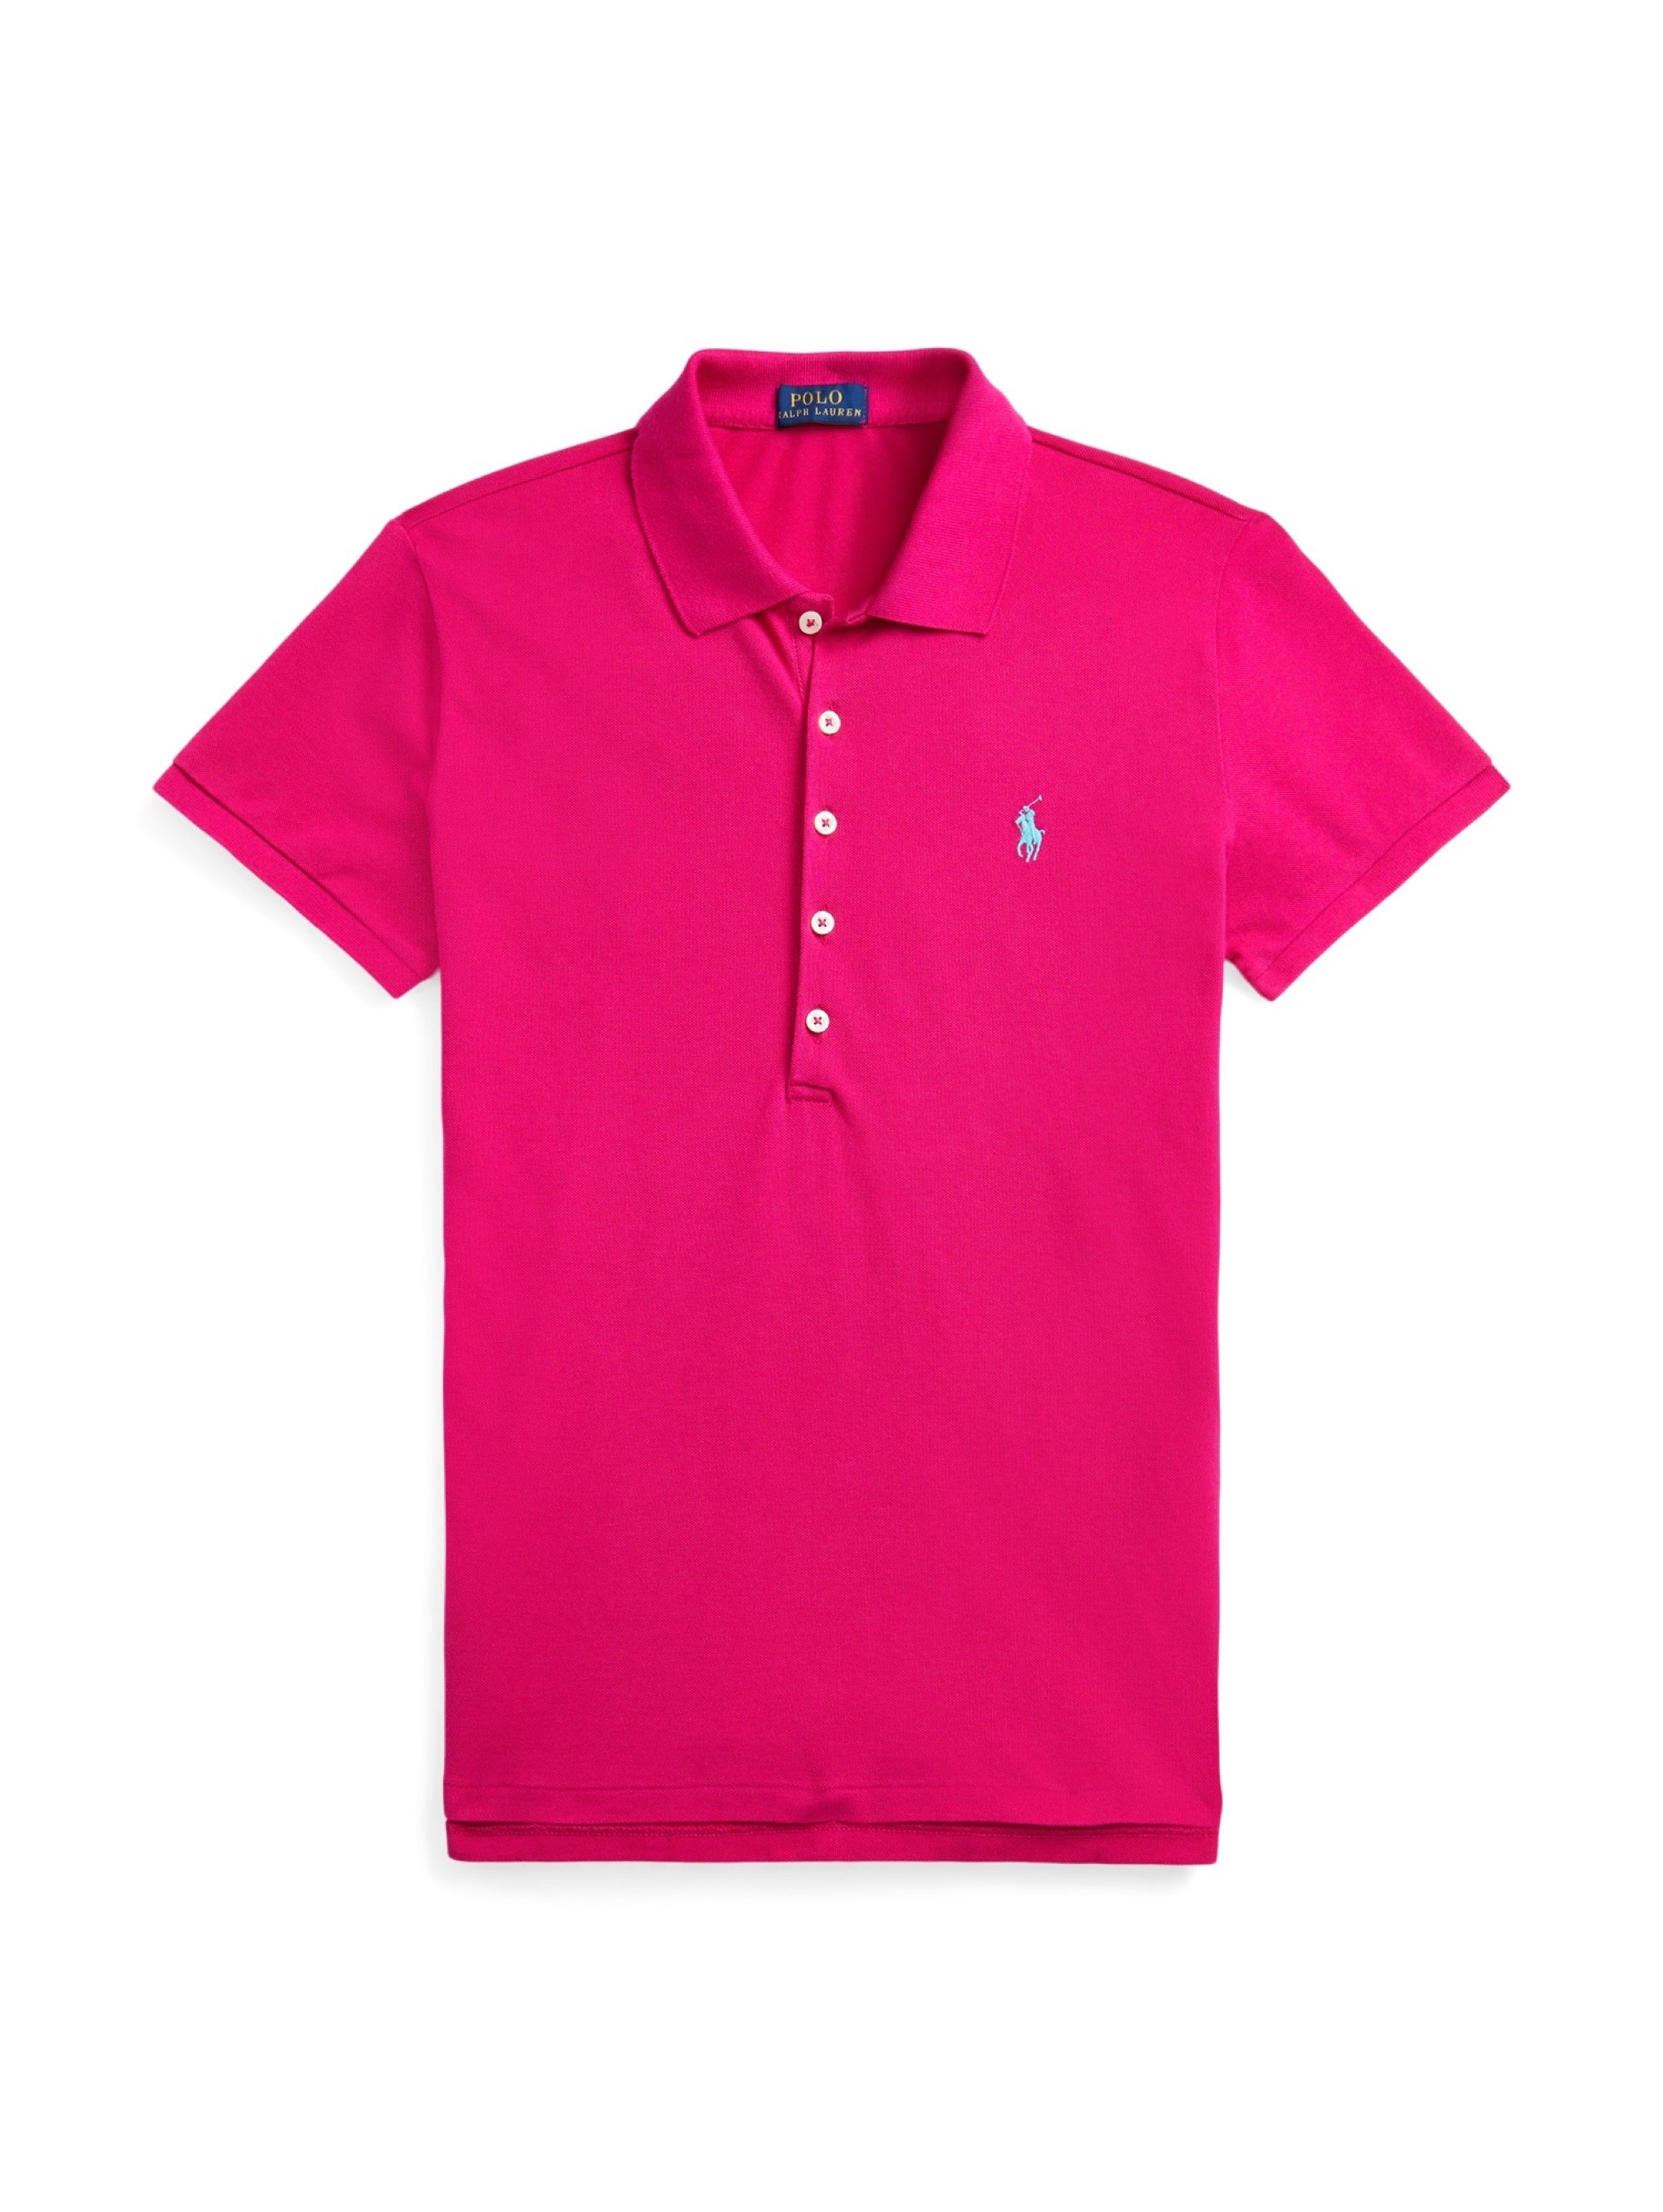 Pink Slim Fit Short Sleeve Polo Shirt